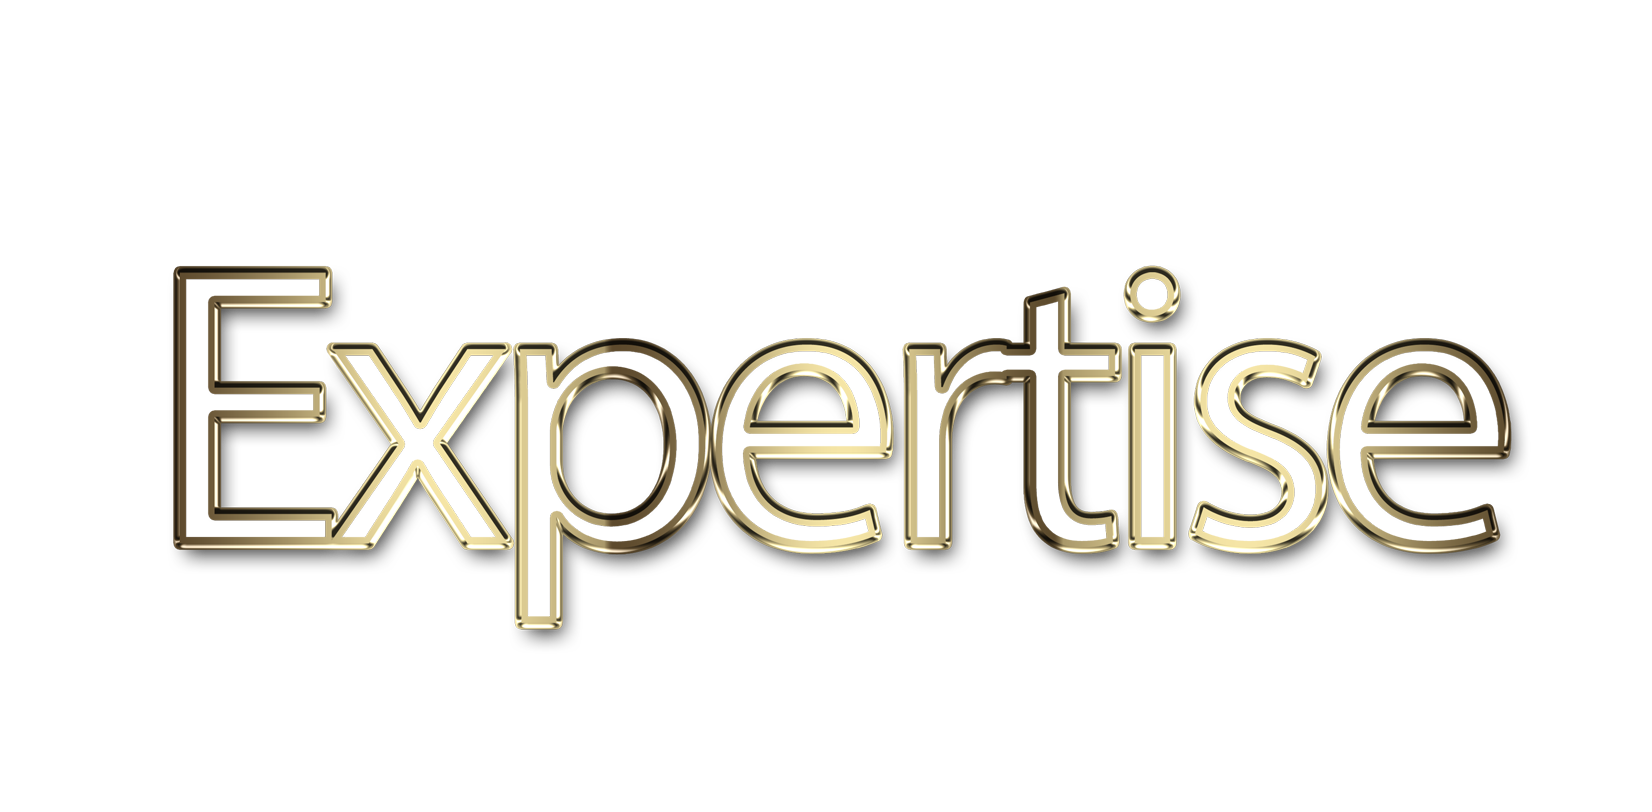 Expertise png, word Expertise png, Expertise word png, Expertise text png, Expertise letters png, Expertise word art typography PNG images, transparent png